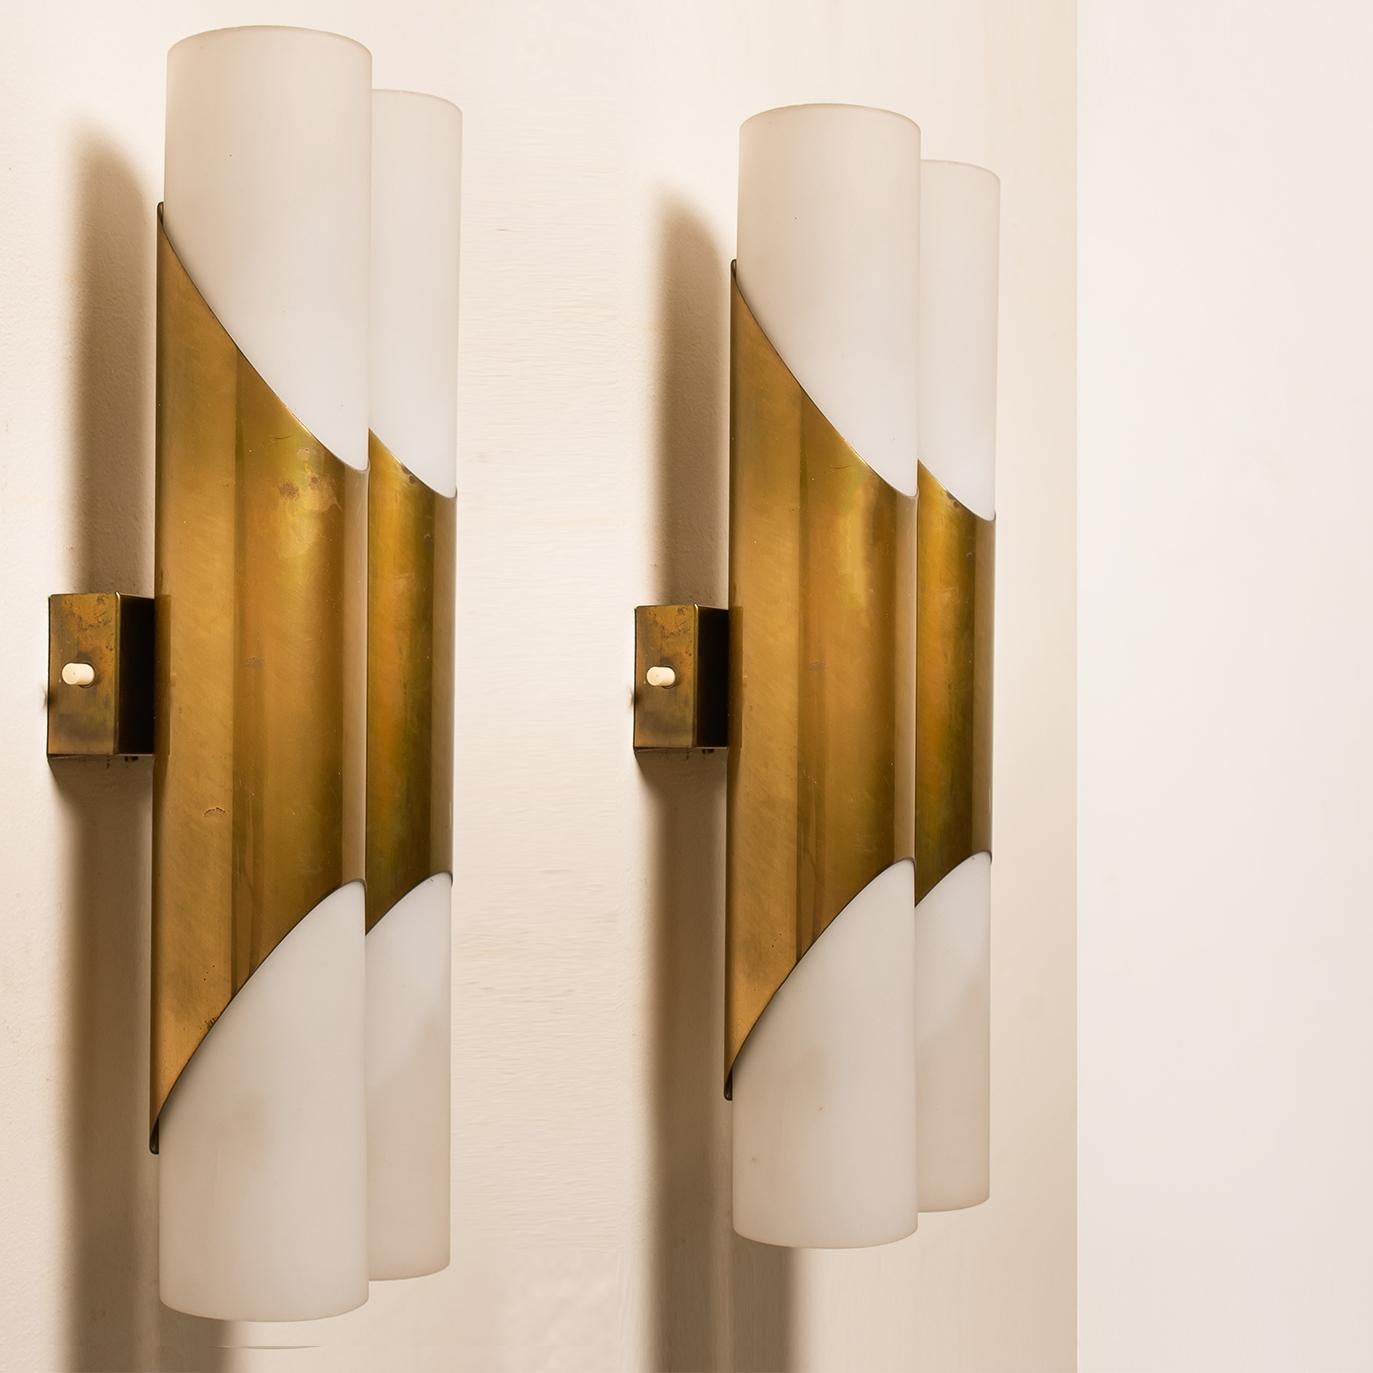 Brass Four Wall Sconces or Wall Lights in the Style of RAAK Amsterdam, 1970 For Sale